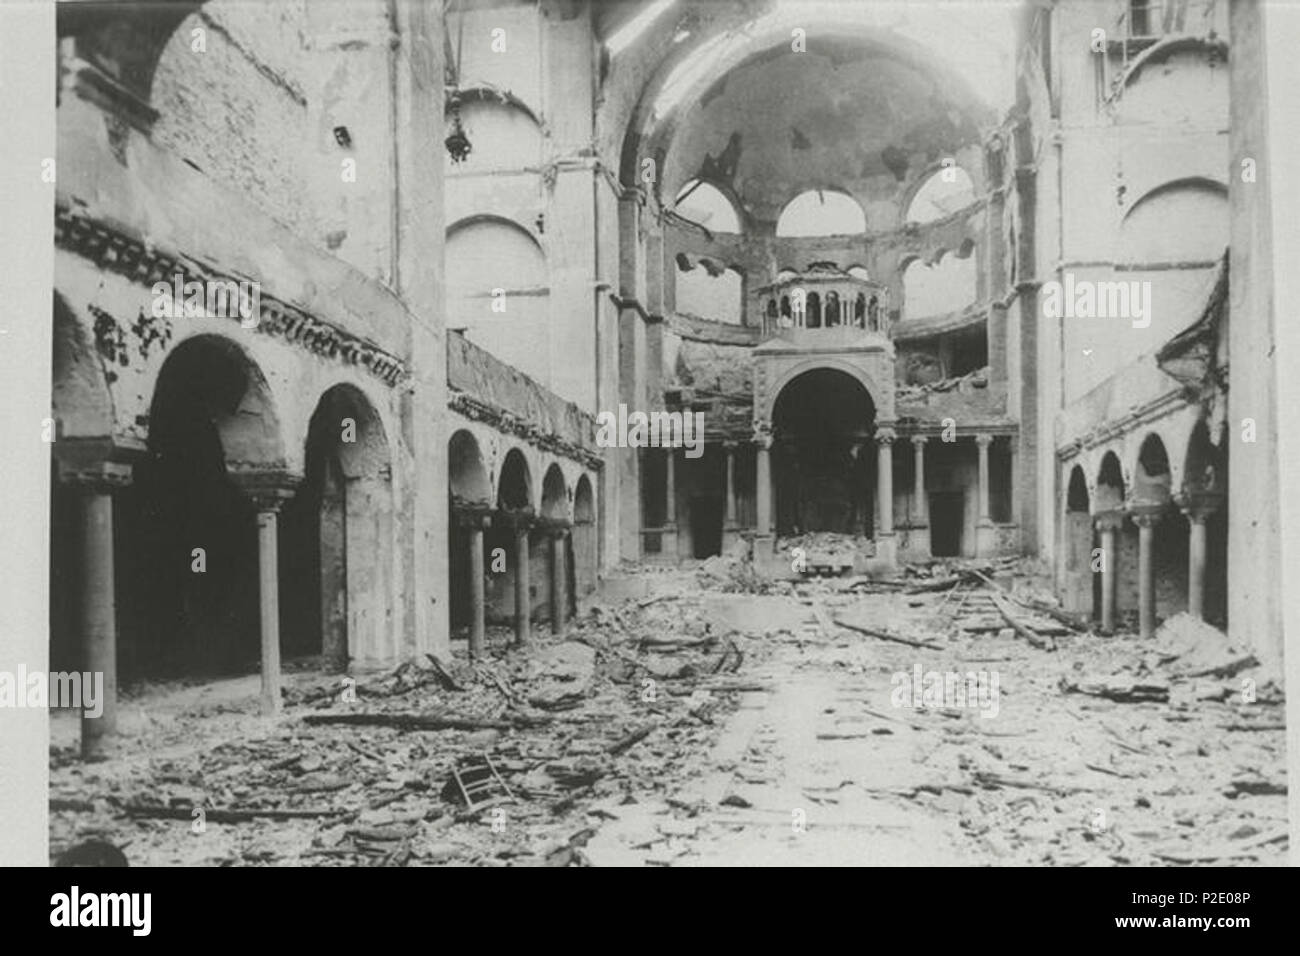 . English: Interior view of the destroyed Fasanenstrasse Synagogue, Berlin, burned on Kristallnacht; November Pogroms. 8 March 2010, 07:36:44. Center for Jewish History, NYC 26 Interior view of the destroyed Fasanenstrasse Synagogue, Berlin Stock Photo